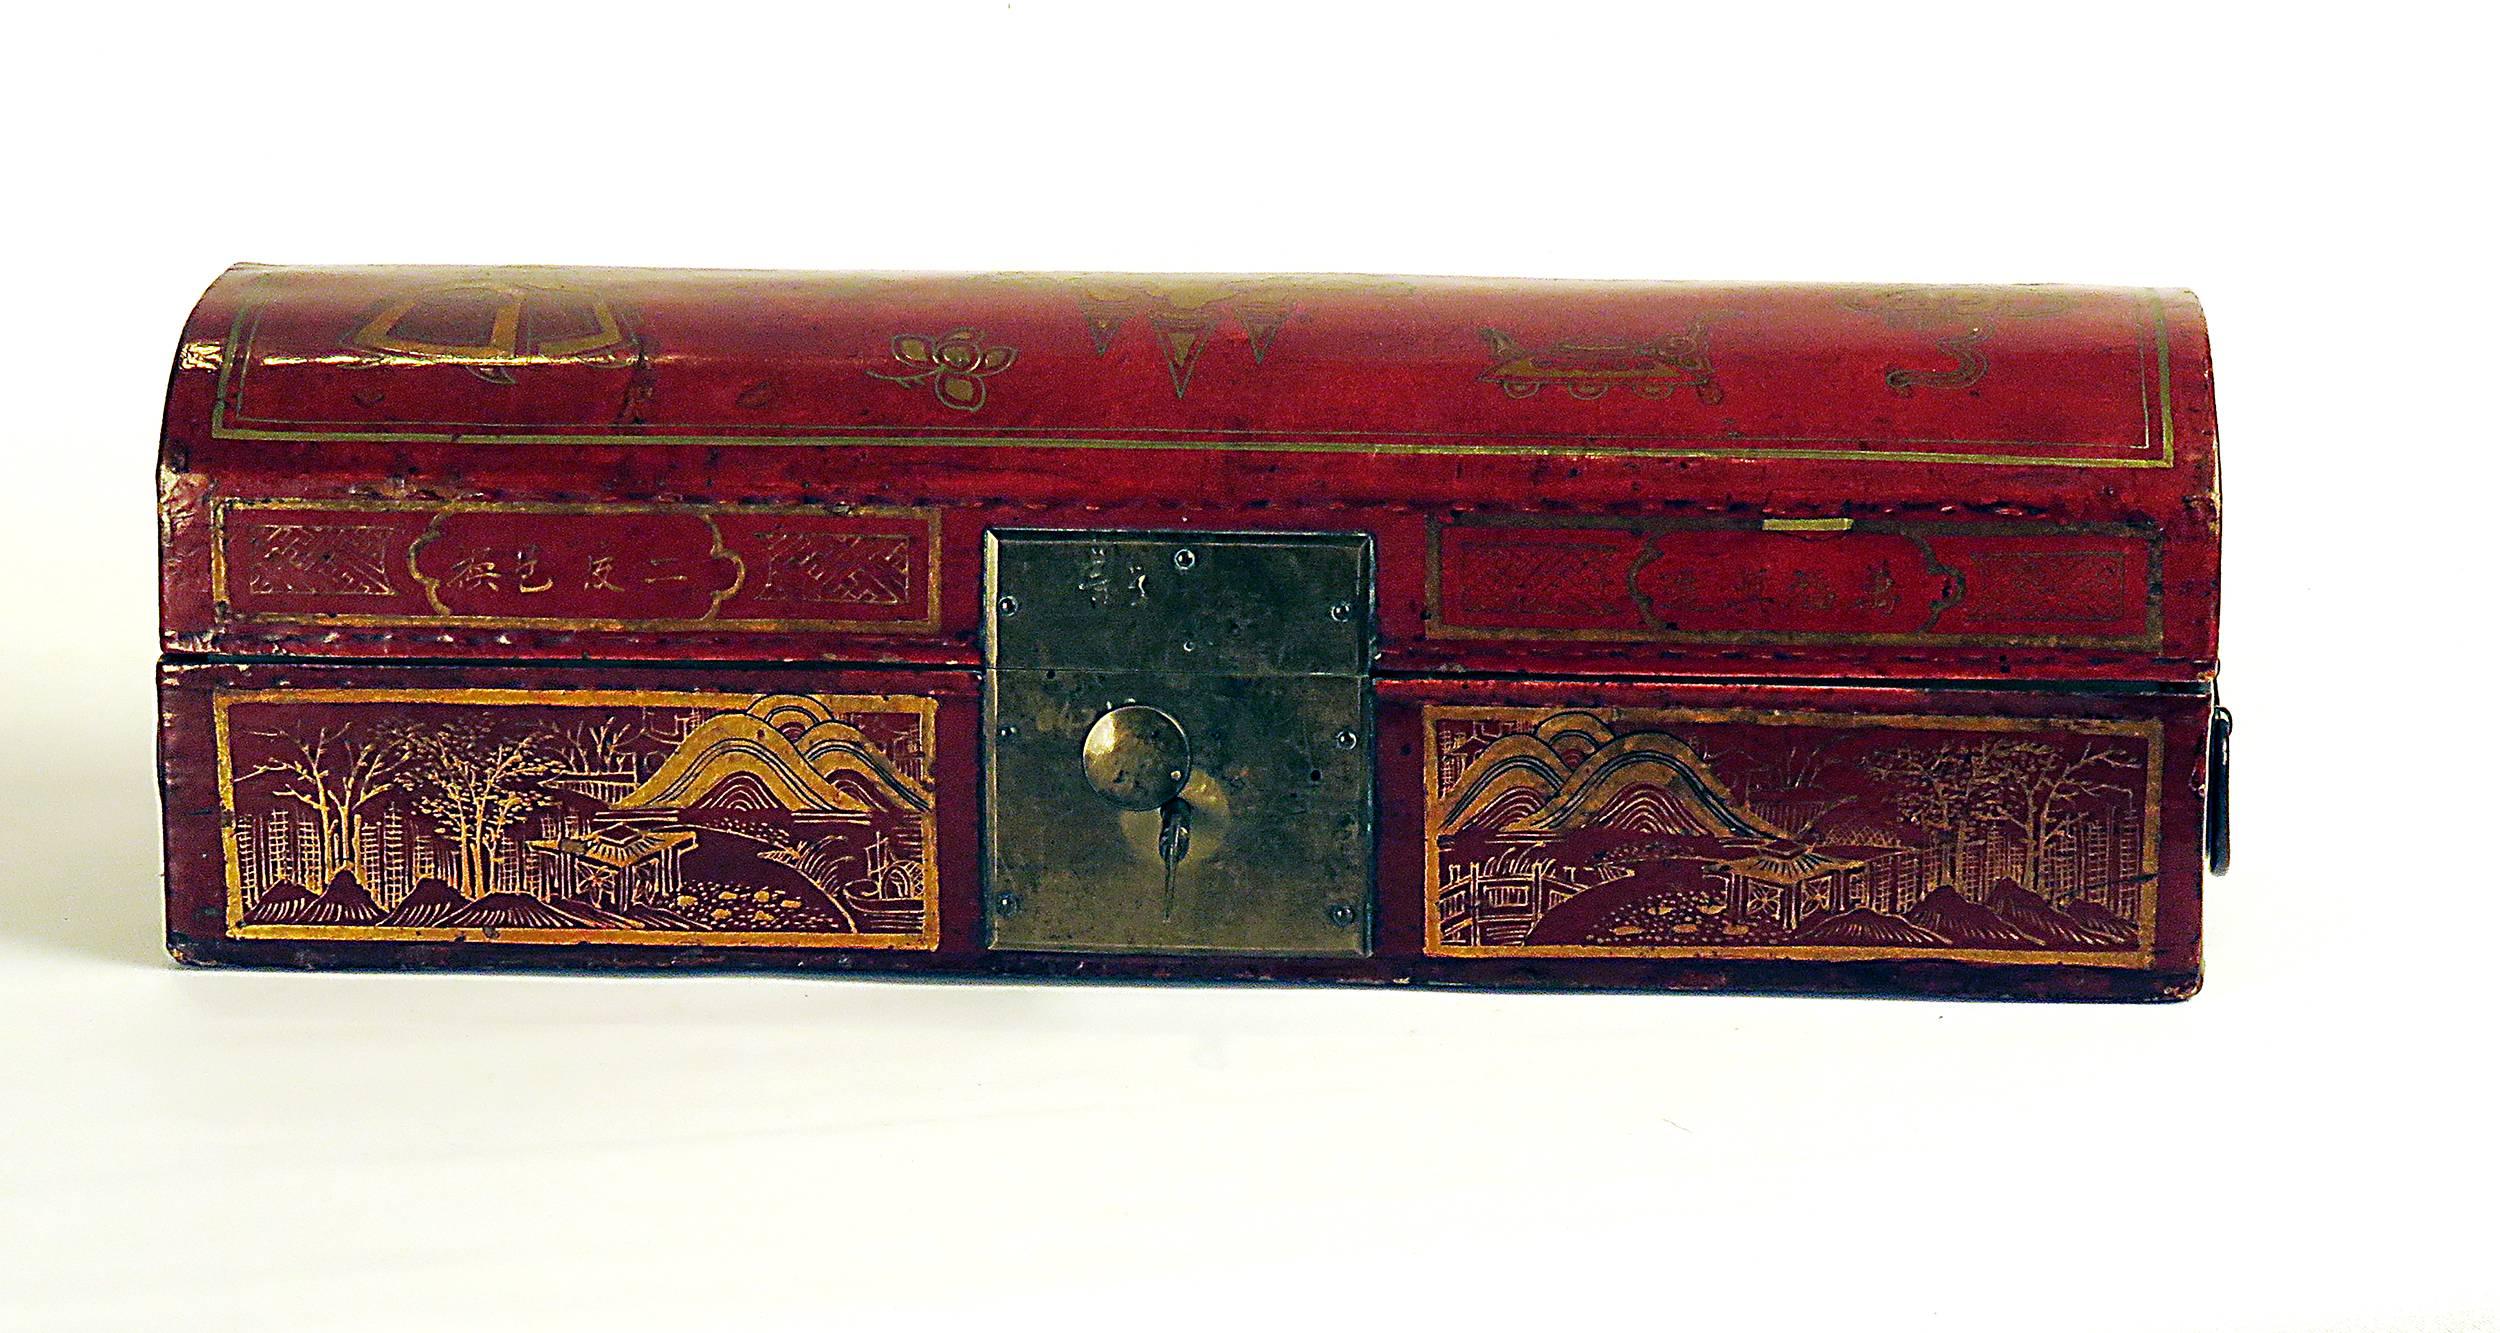 This leather lacquered and gilt domed box was made in China, circa 1870 and was used originally as a pillow and a place to store ones valuables. The original lock and hardware seem to be in place. These hard pillows are not seen in the west but are